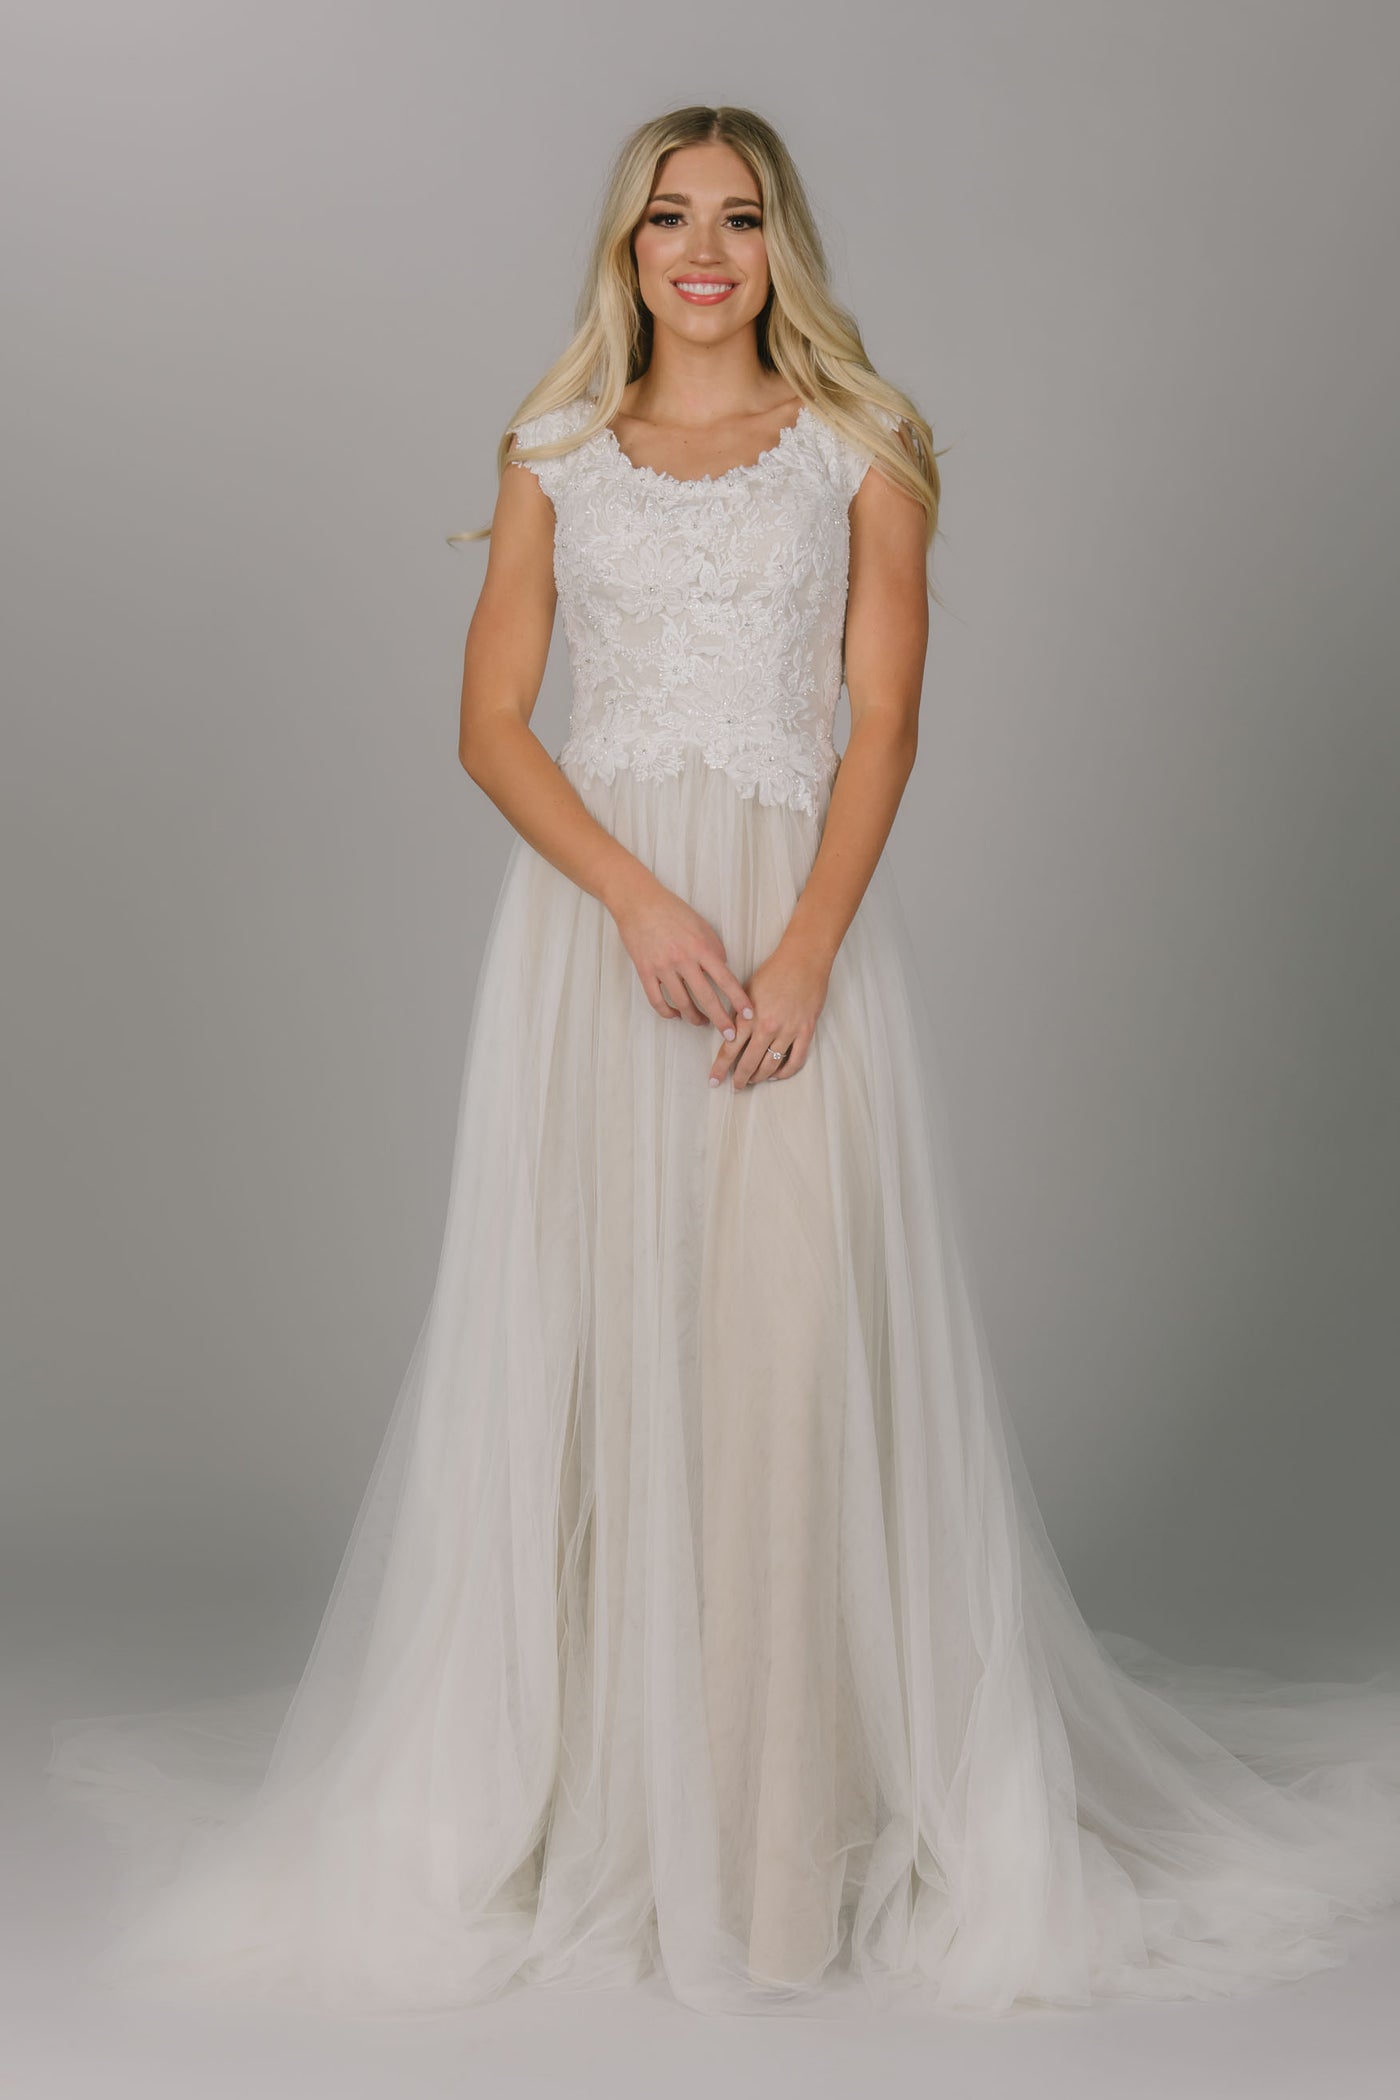 A-line modest wedding dress. It has a scoop neckline and cap sleeves. The top has lace and beaded detailing.  The skirt is tulle with a champagne underlay.  